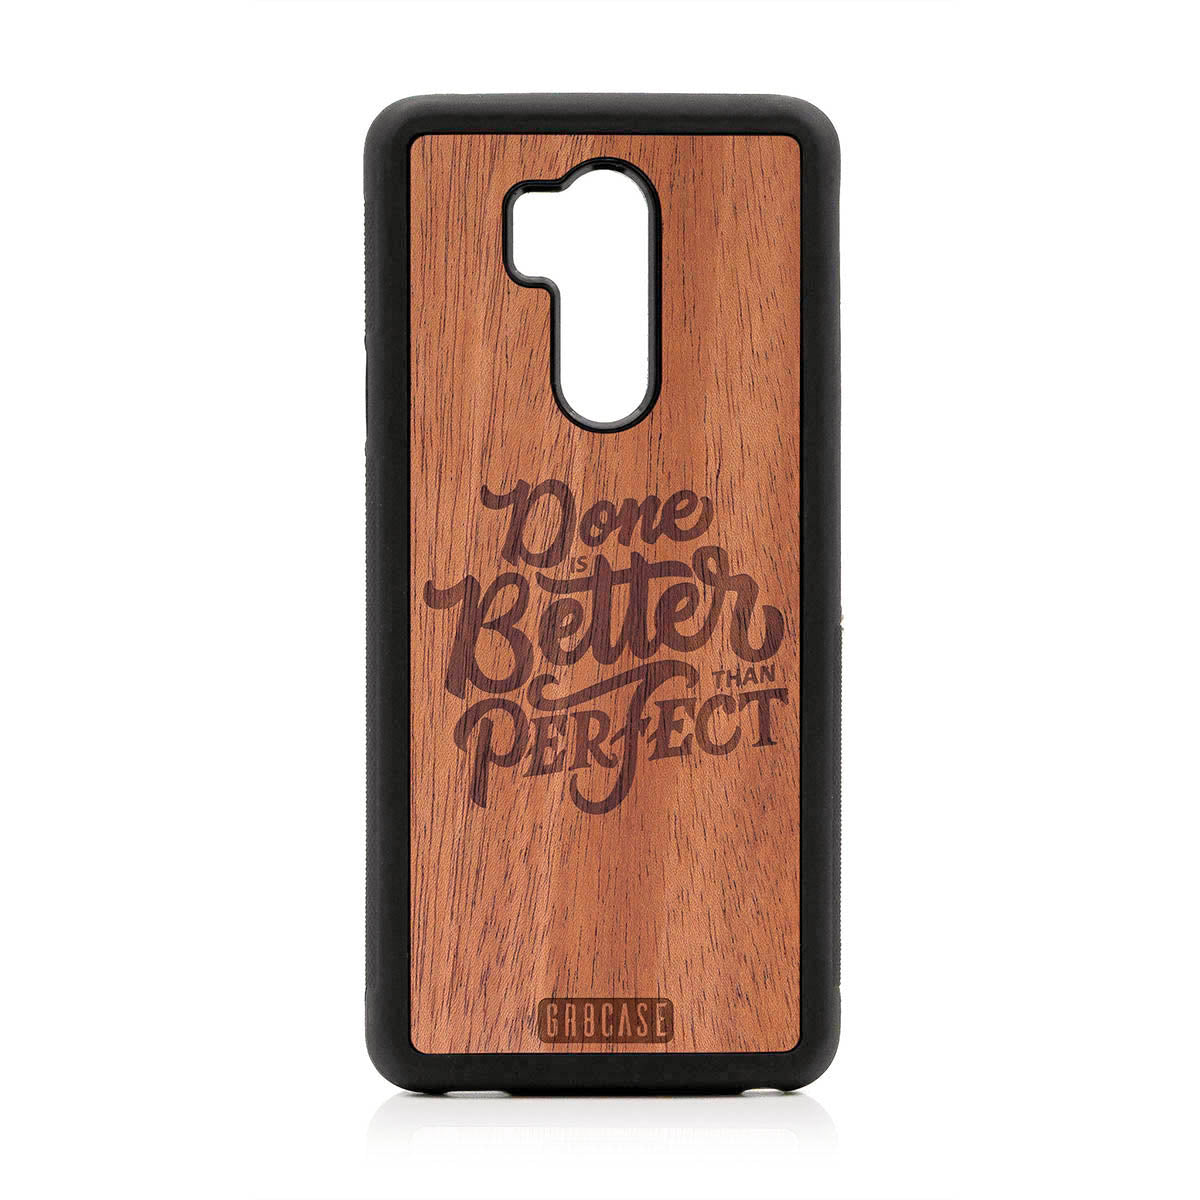 Done Is Better Than Perfect Design Wood Case For LG G7 ThinQ by GR8CASE